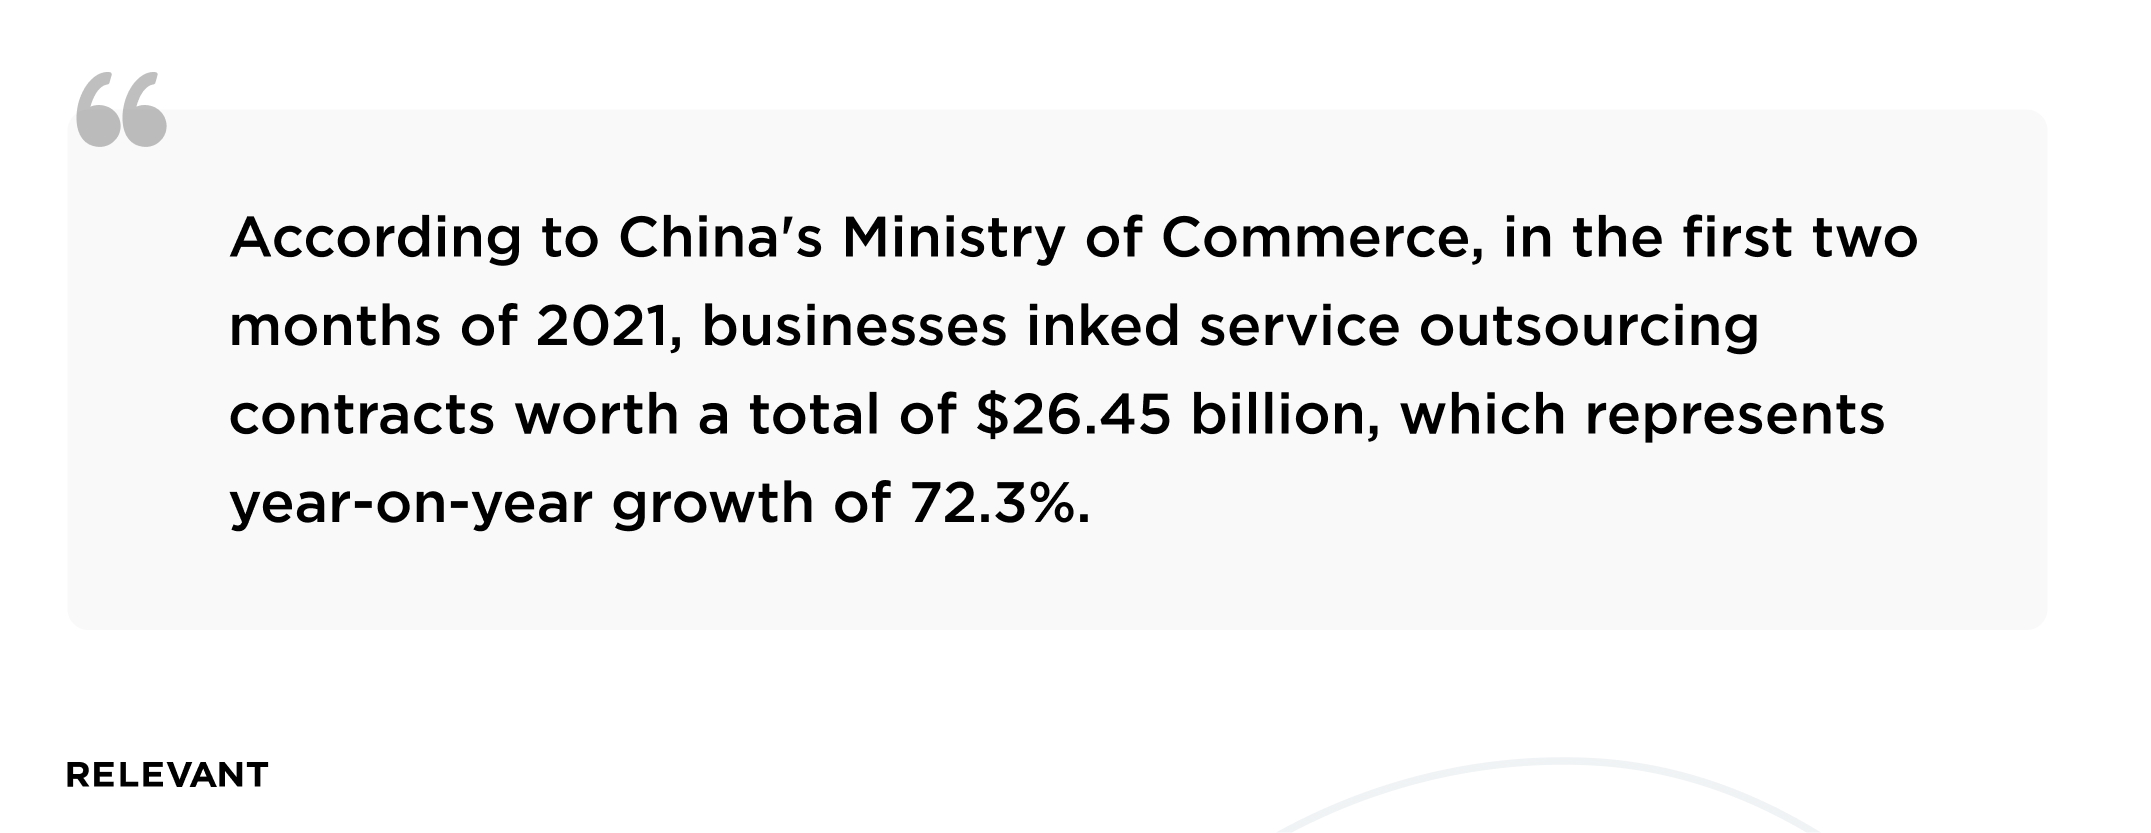 According to China's Ministry of Commerce, in the first two months of 2021, businesses inked service outsourcing contracts worth a total of $26.45 billion, which represents year-on-year growth of 72.3%.